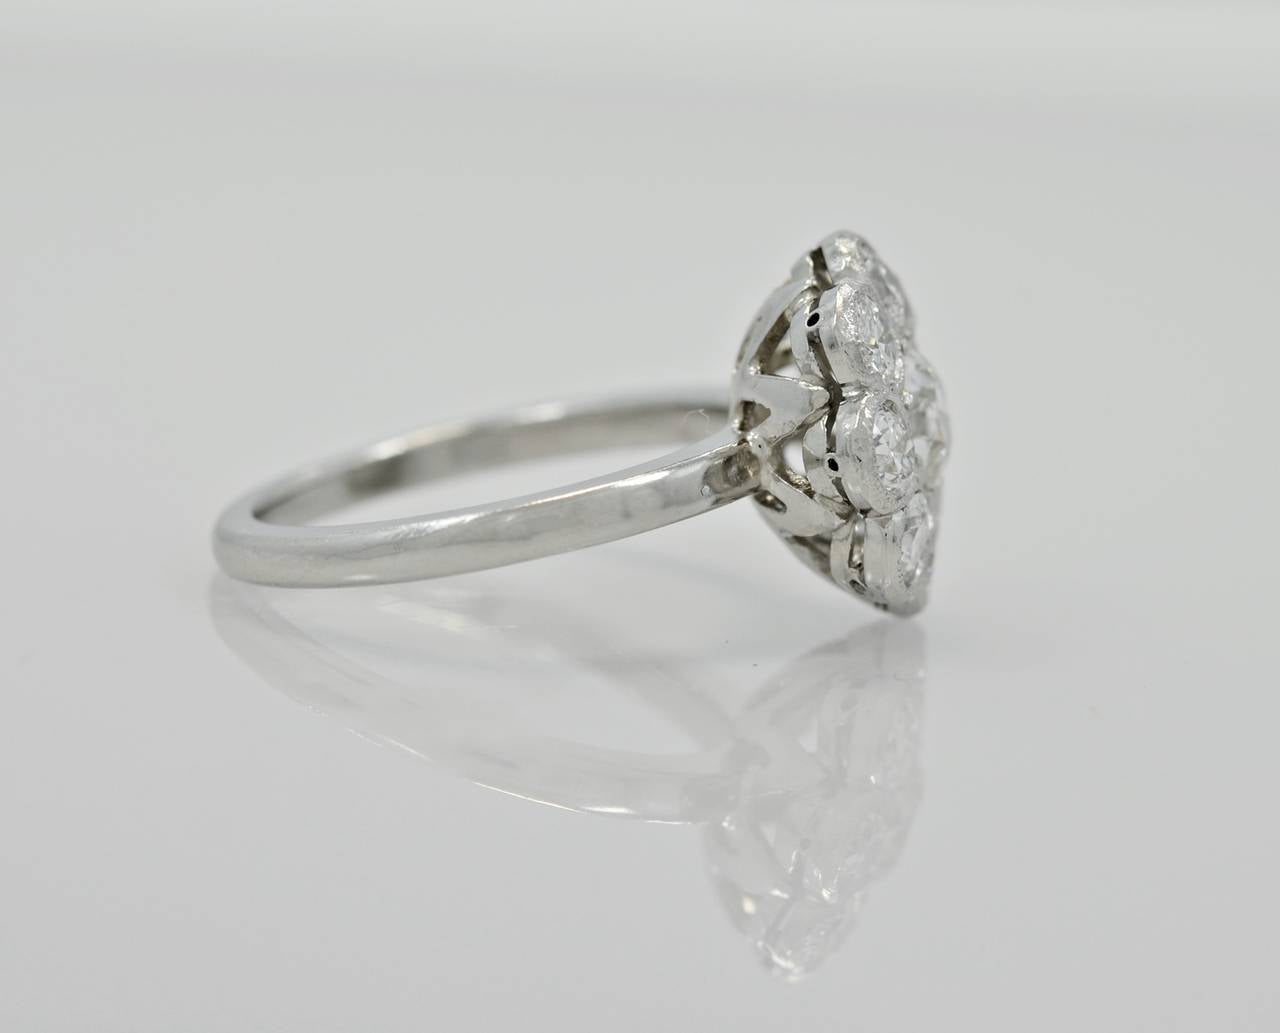 J35063 

Extravagant Edwardian platinum ring featuring a .60ct. apx. center diamond and 1.00ct. apx. T.W. diamond melee. The clarity is VS2 and H-I color. The flower design was popular in rings and brooches from the time period of c. 1910-1915.